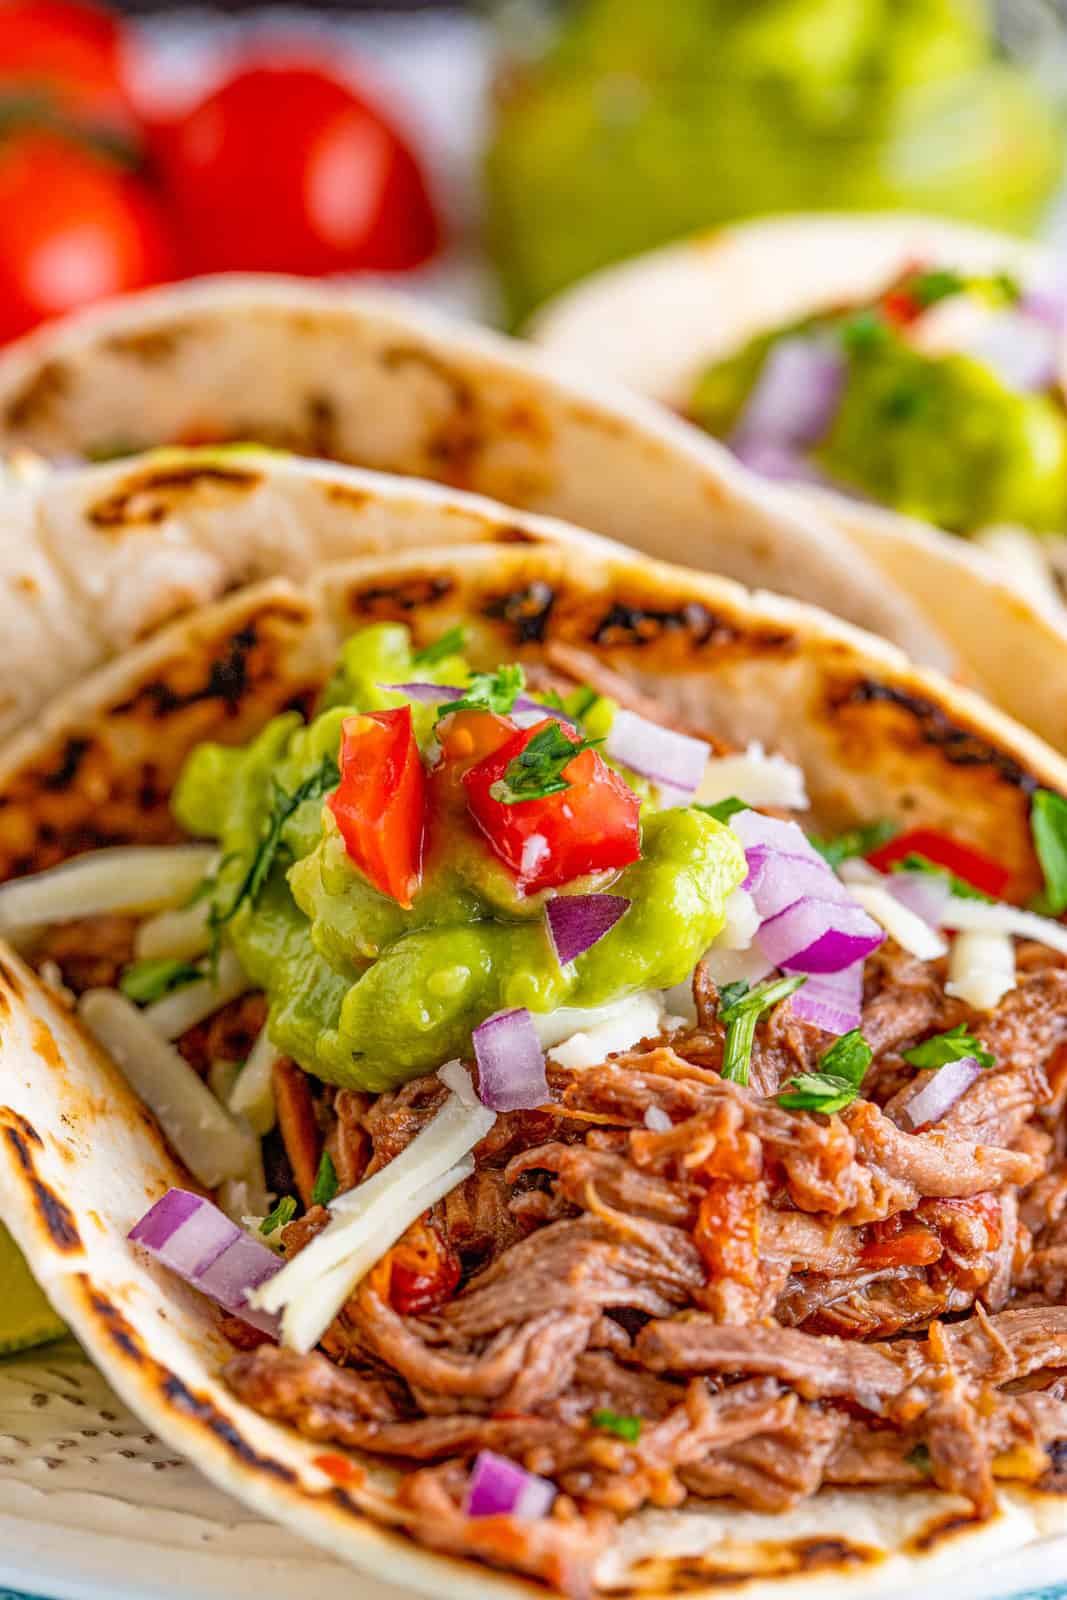 Close up of one taco showing toppings and shredded meat.